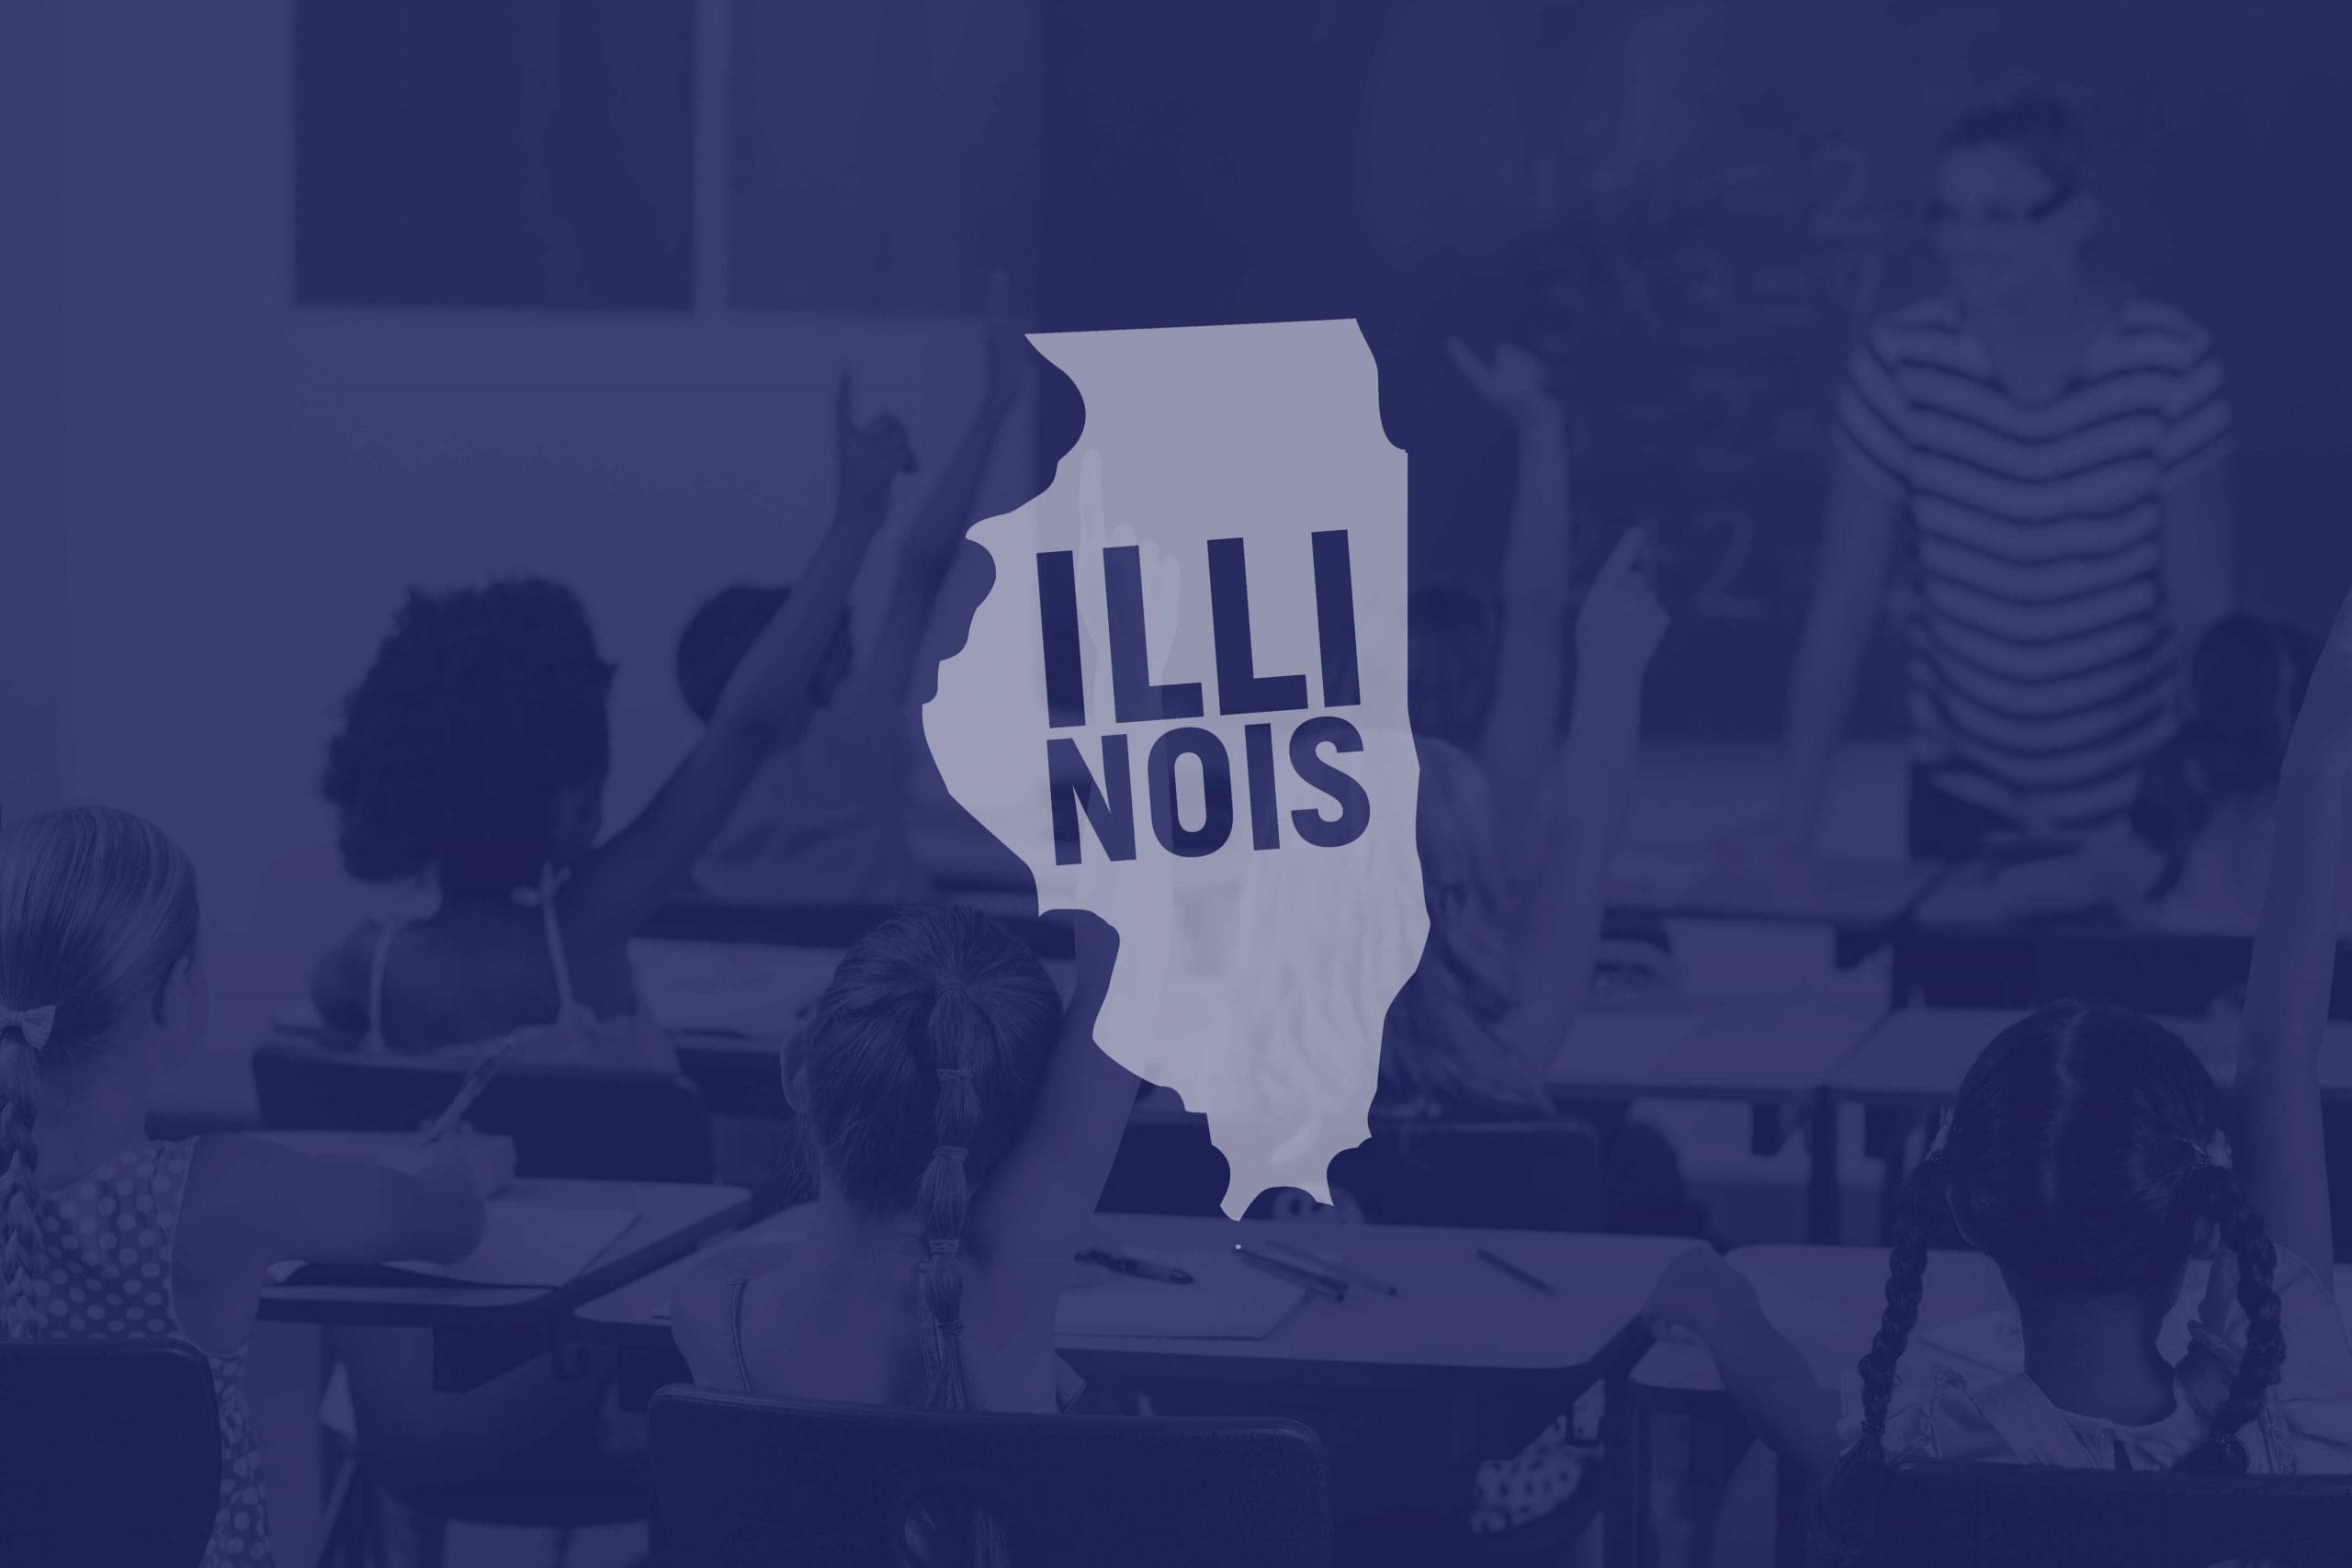 Outline of the state of Illinois on top of a classroom full of kids raising their hands for their teacher